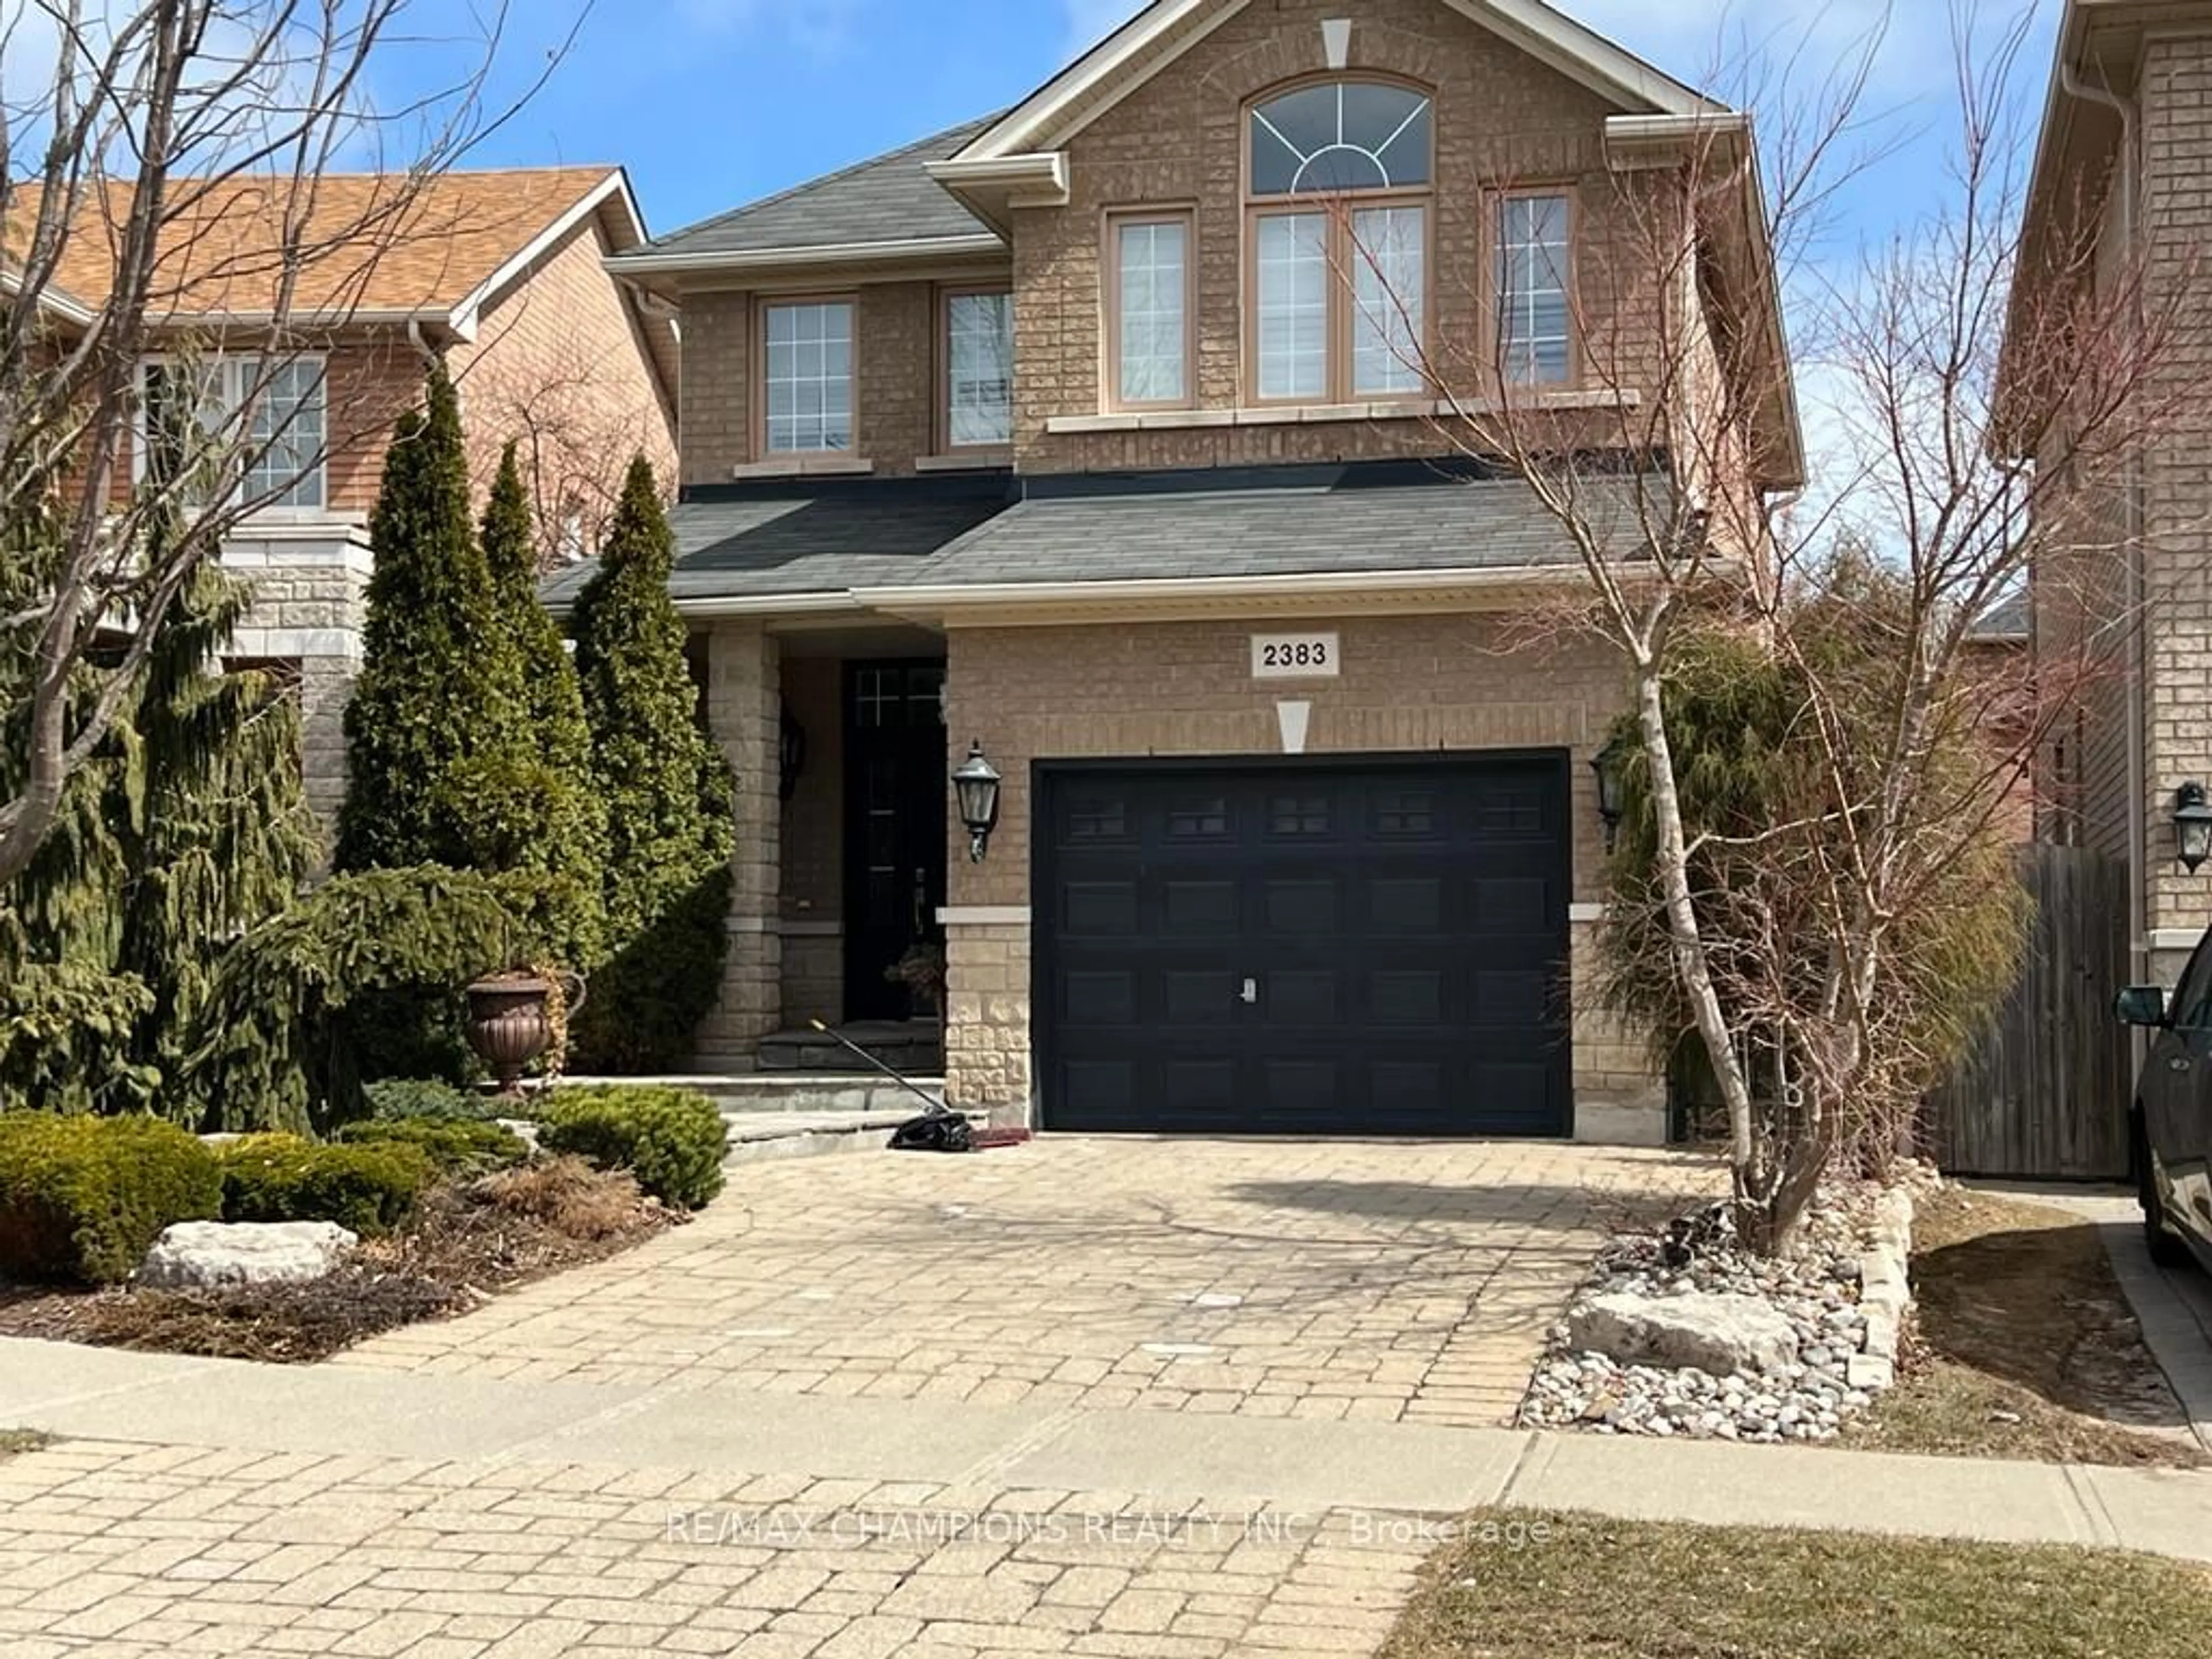 Home with brick exterior material for 2383 Hilda Dr, Oakville Ontario L6H 7N5